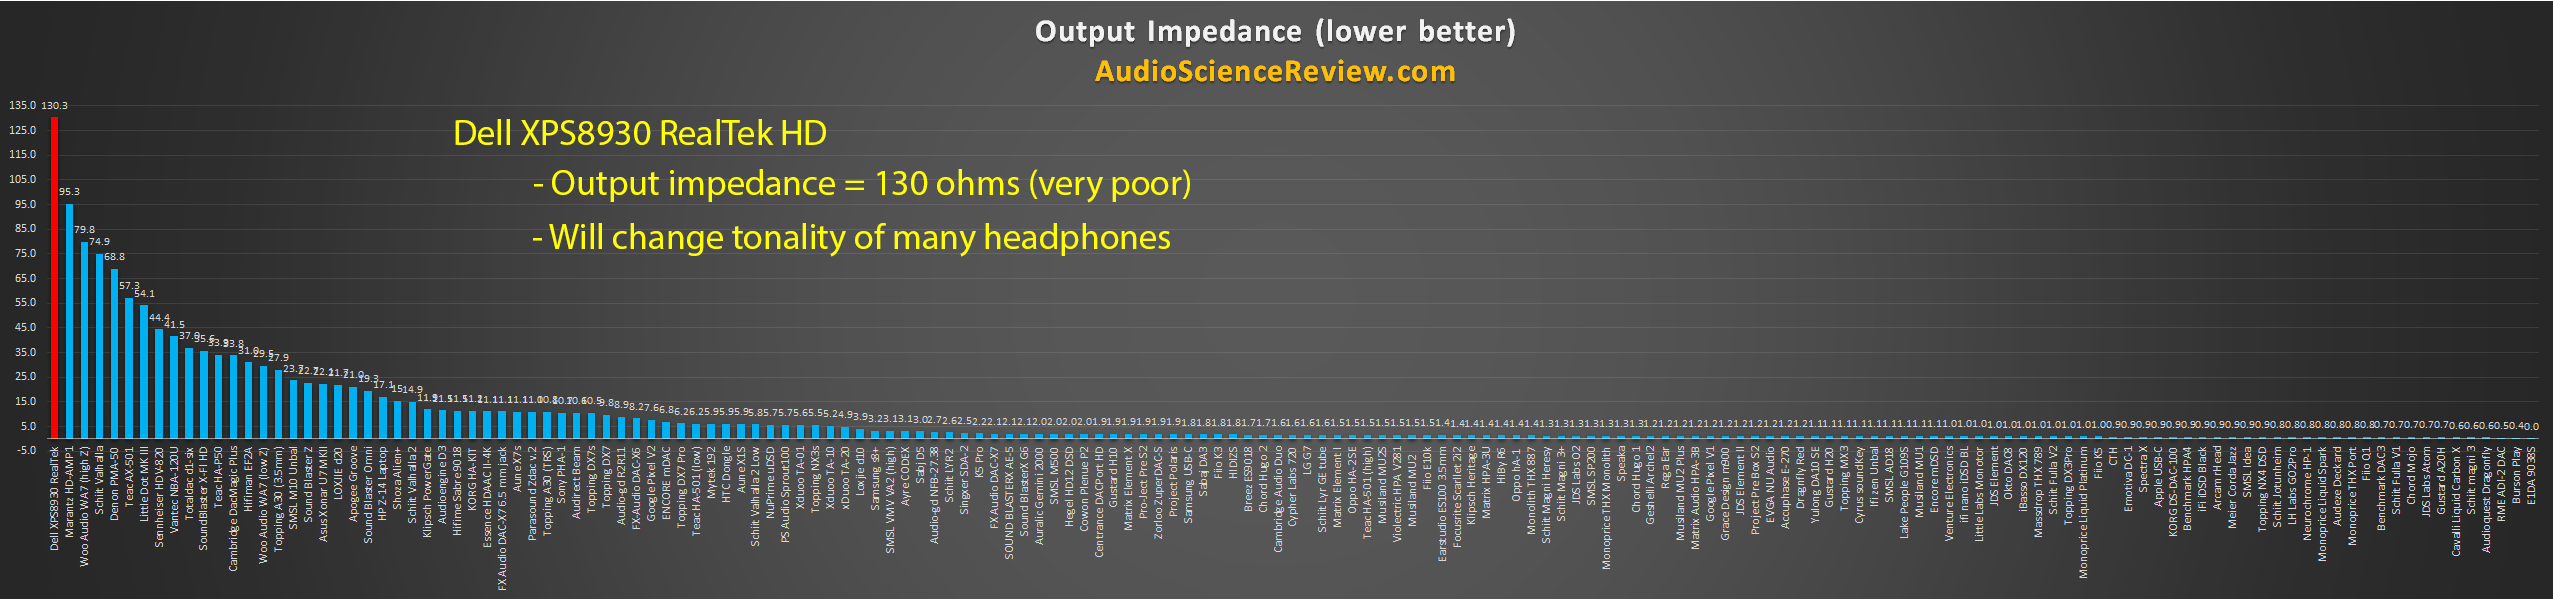 PC motherboard sound output impedance measurement.png